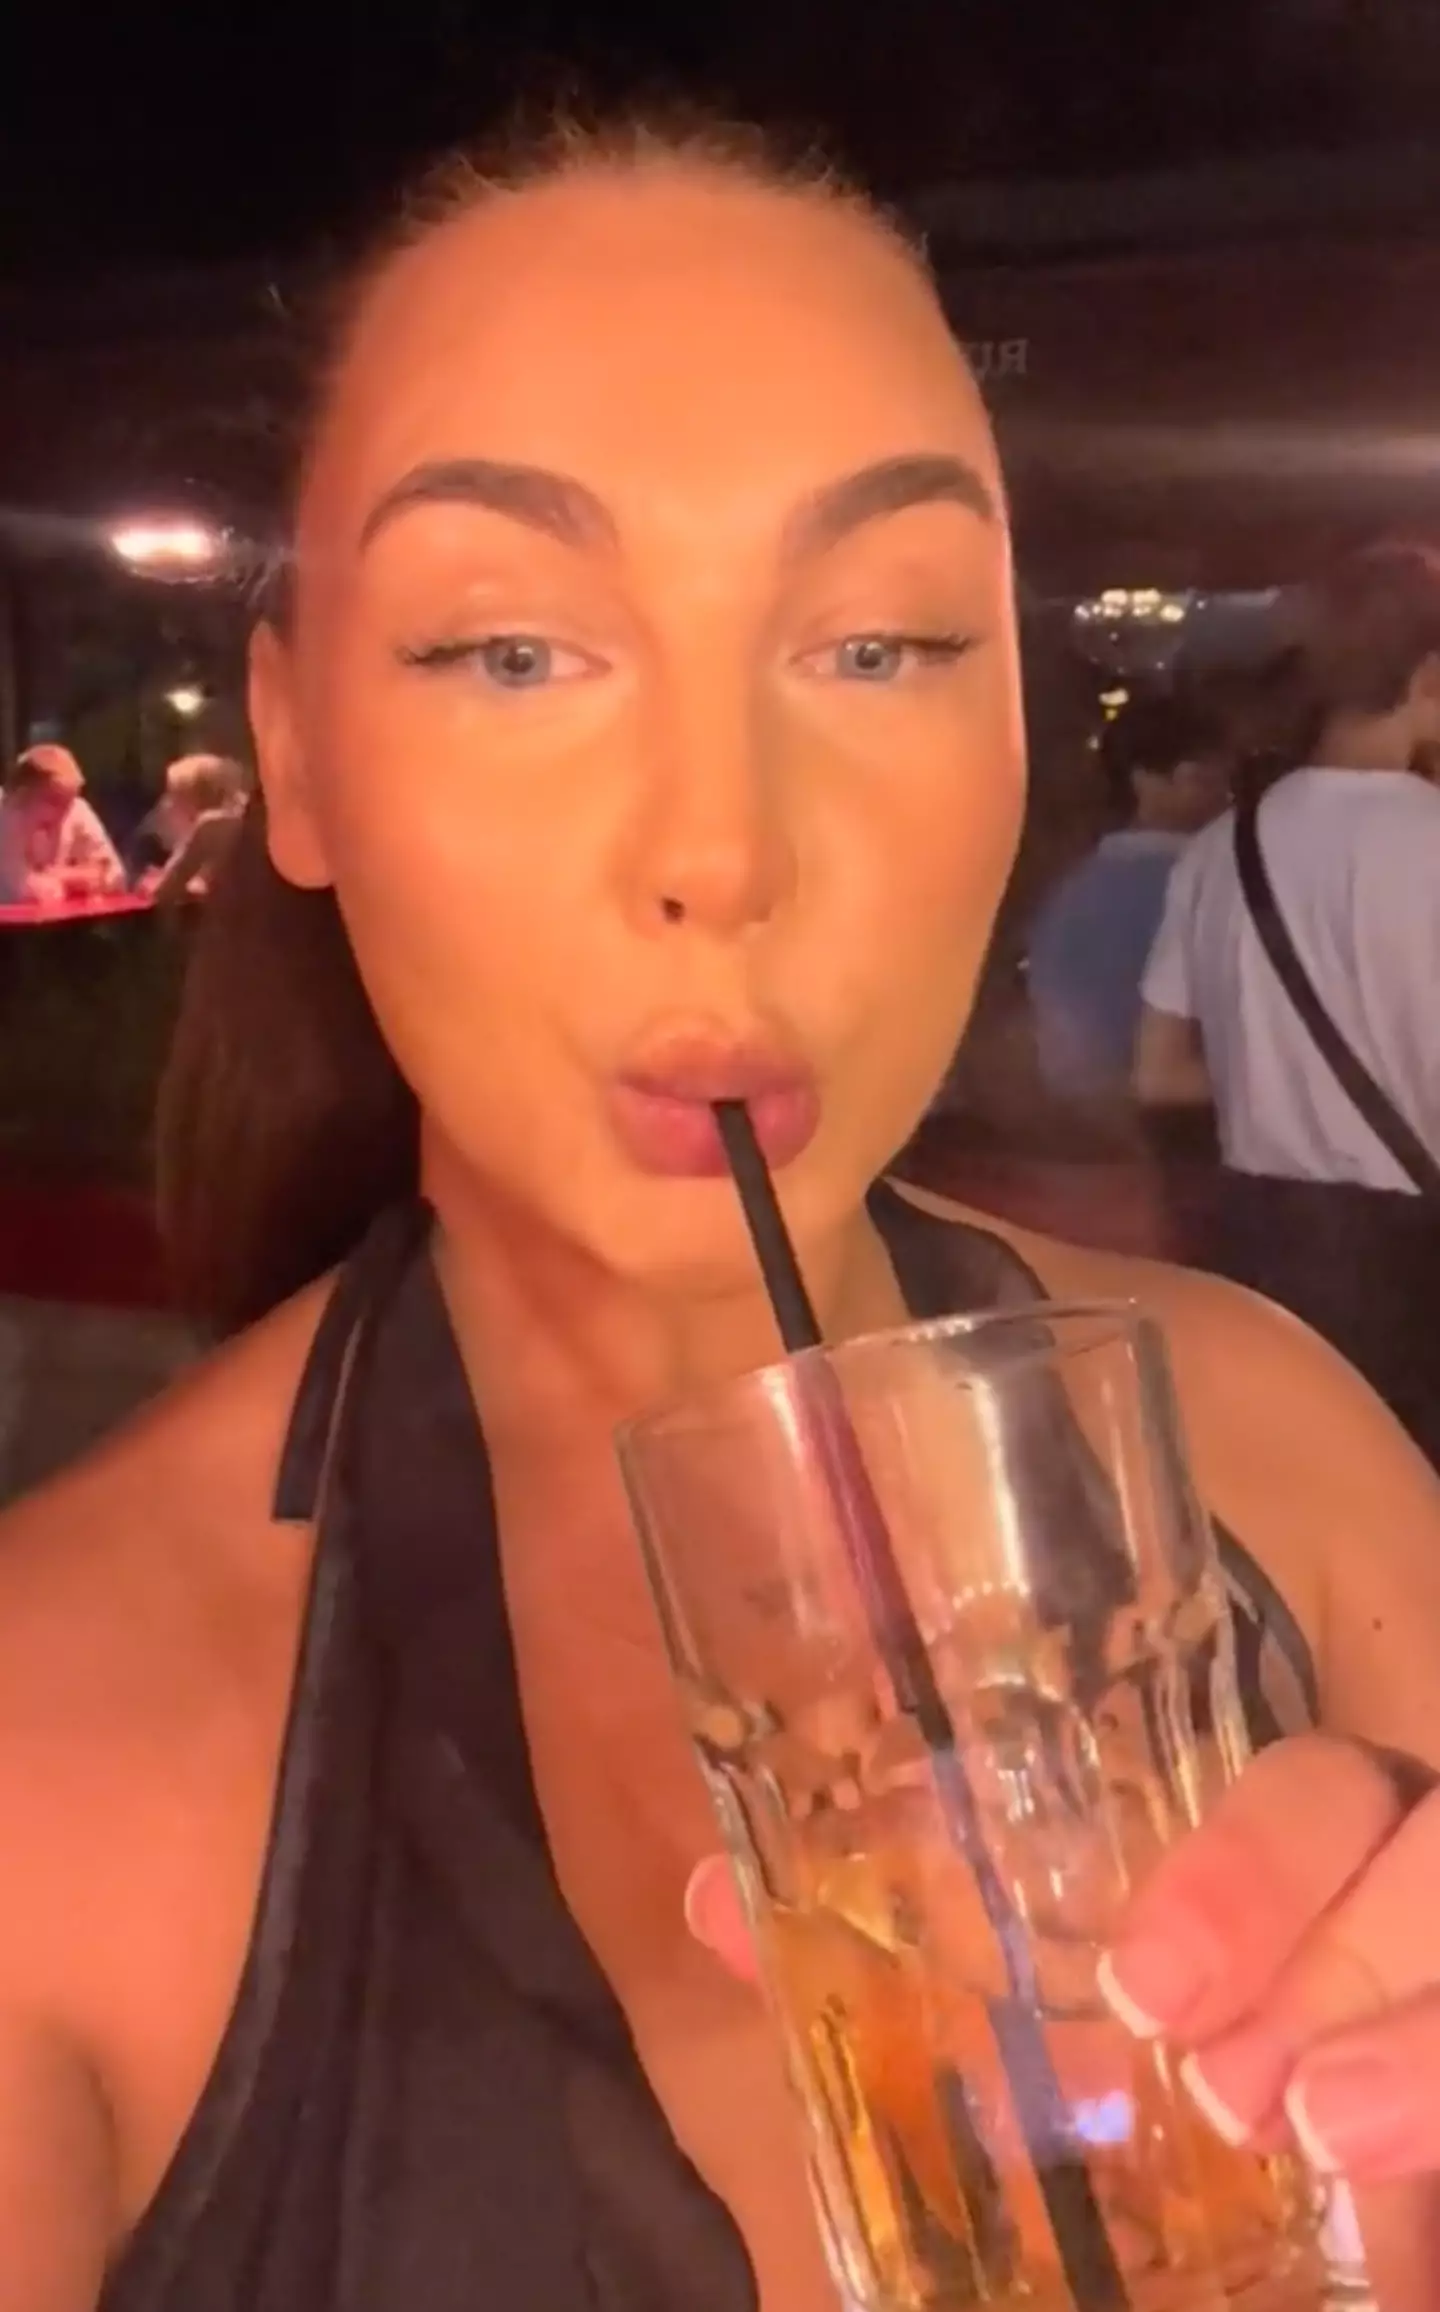 Georgia stuck to sipping soft drinks on her night out.